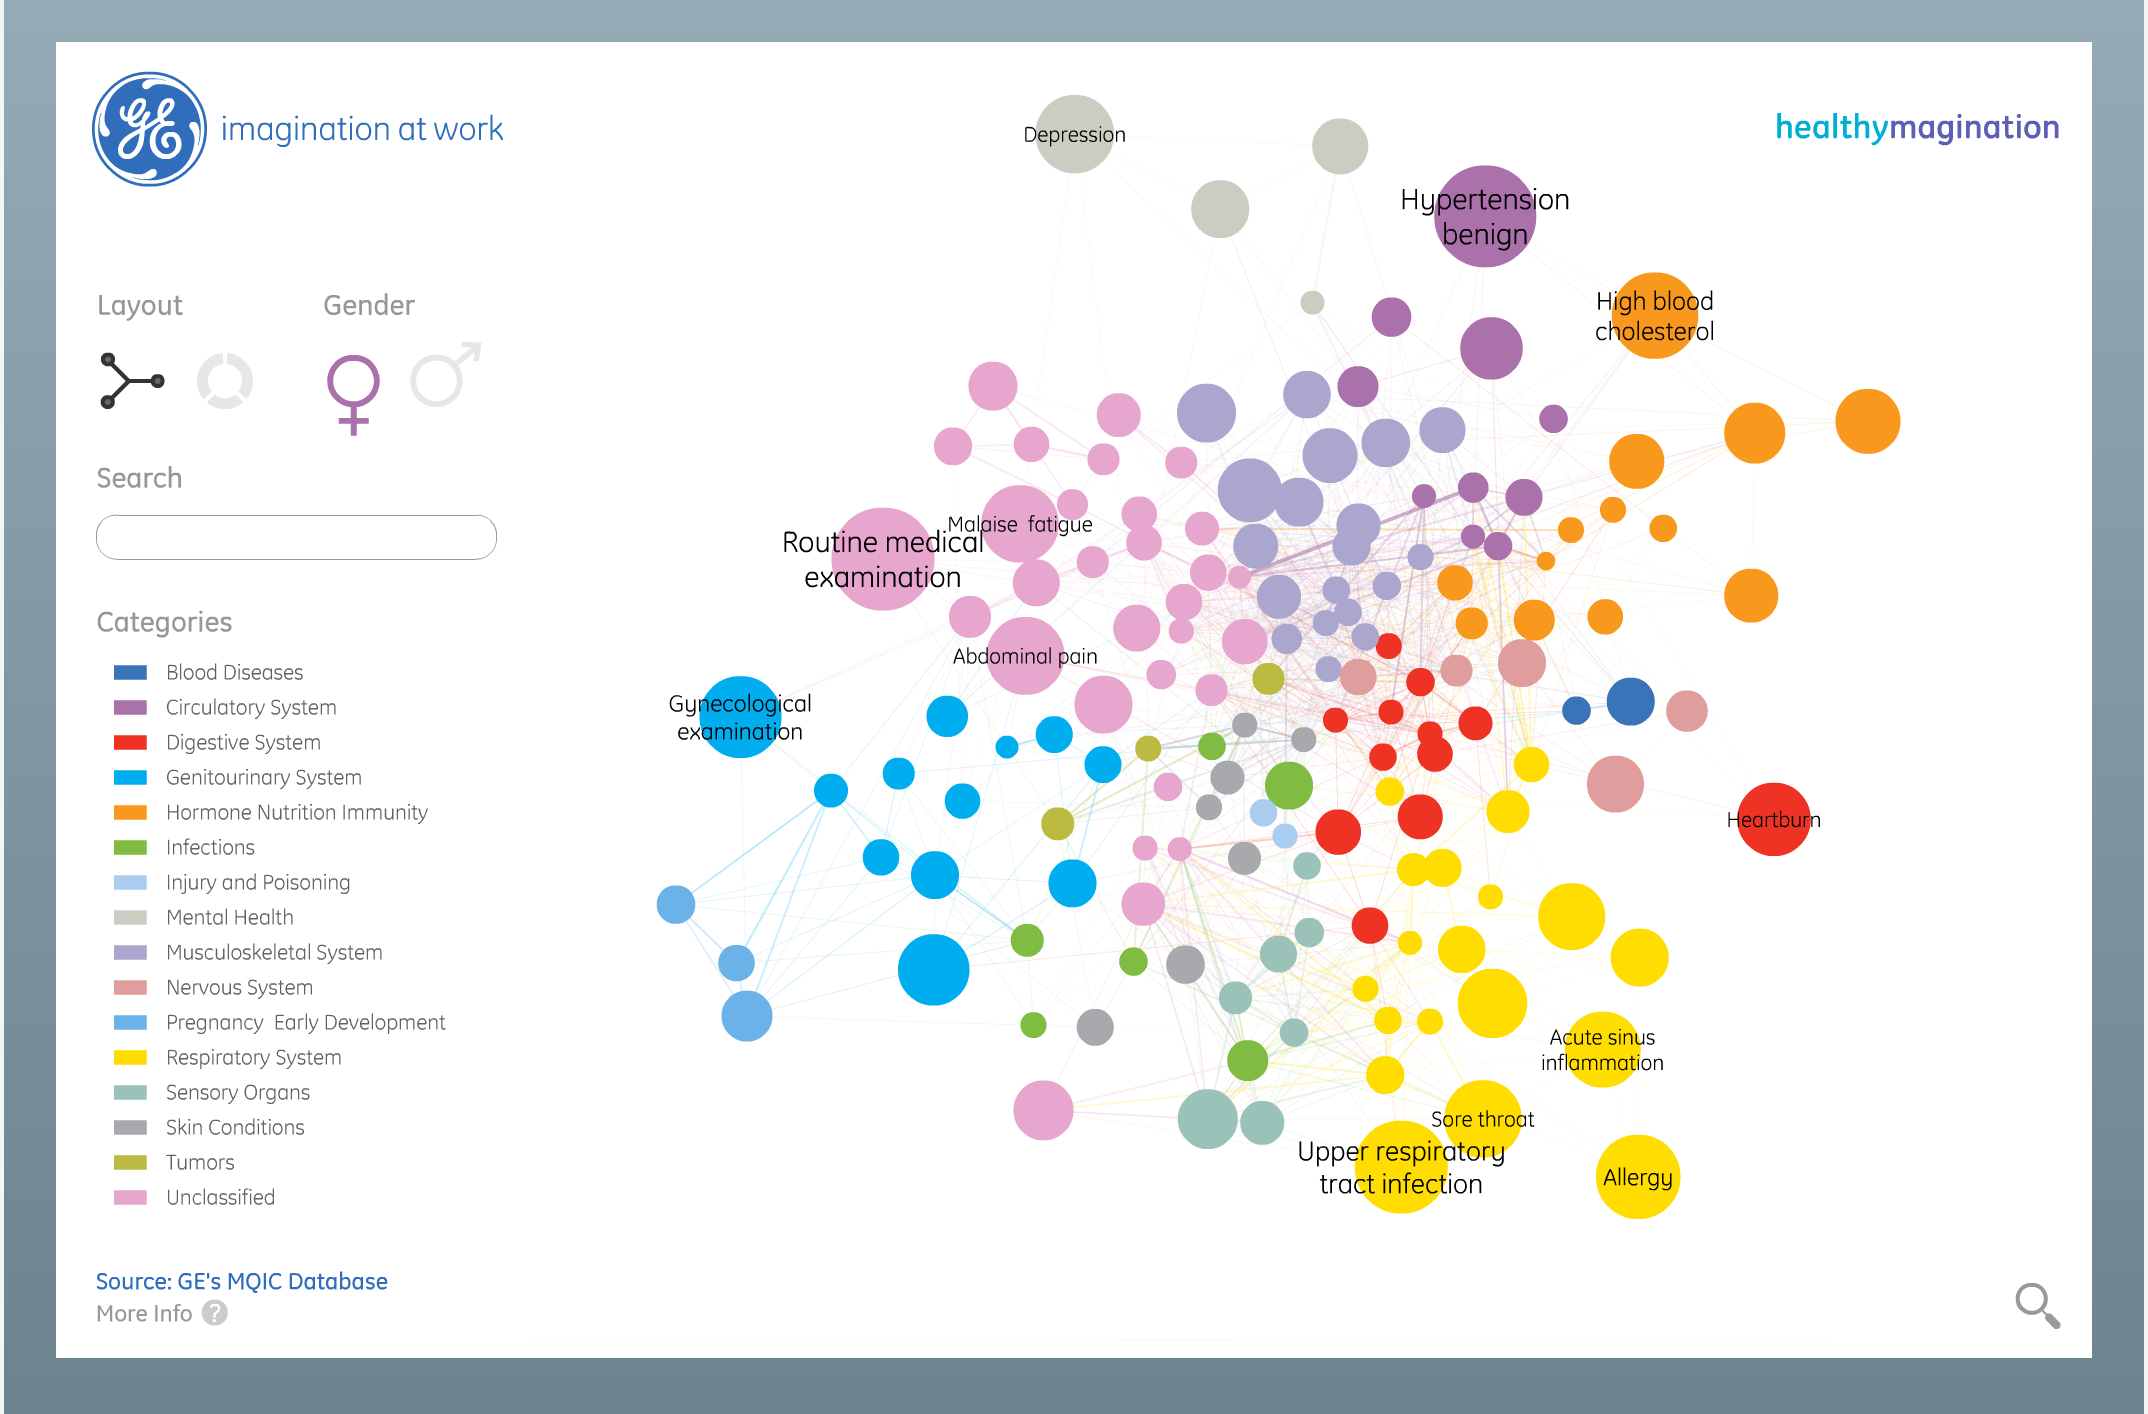 12 Amazing New Data Visualization Examples from the Web - Infogram